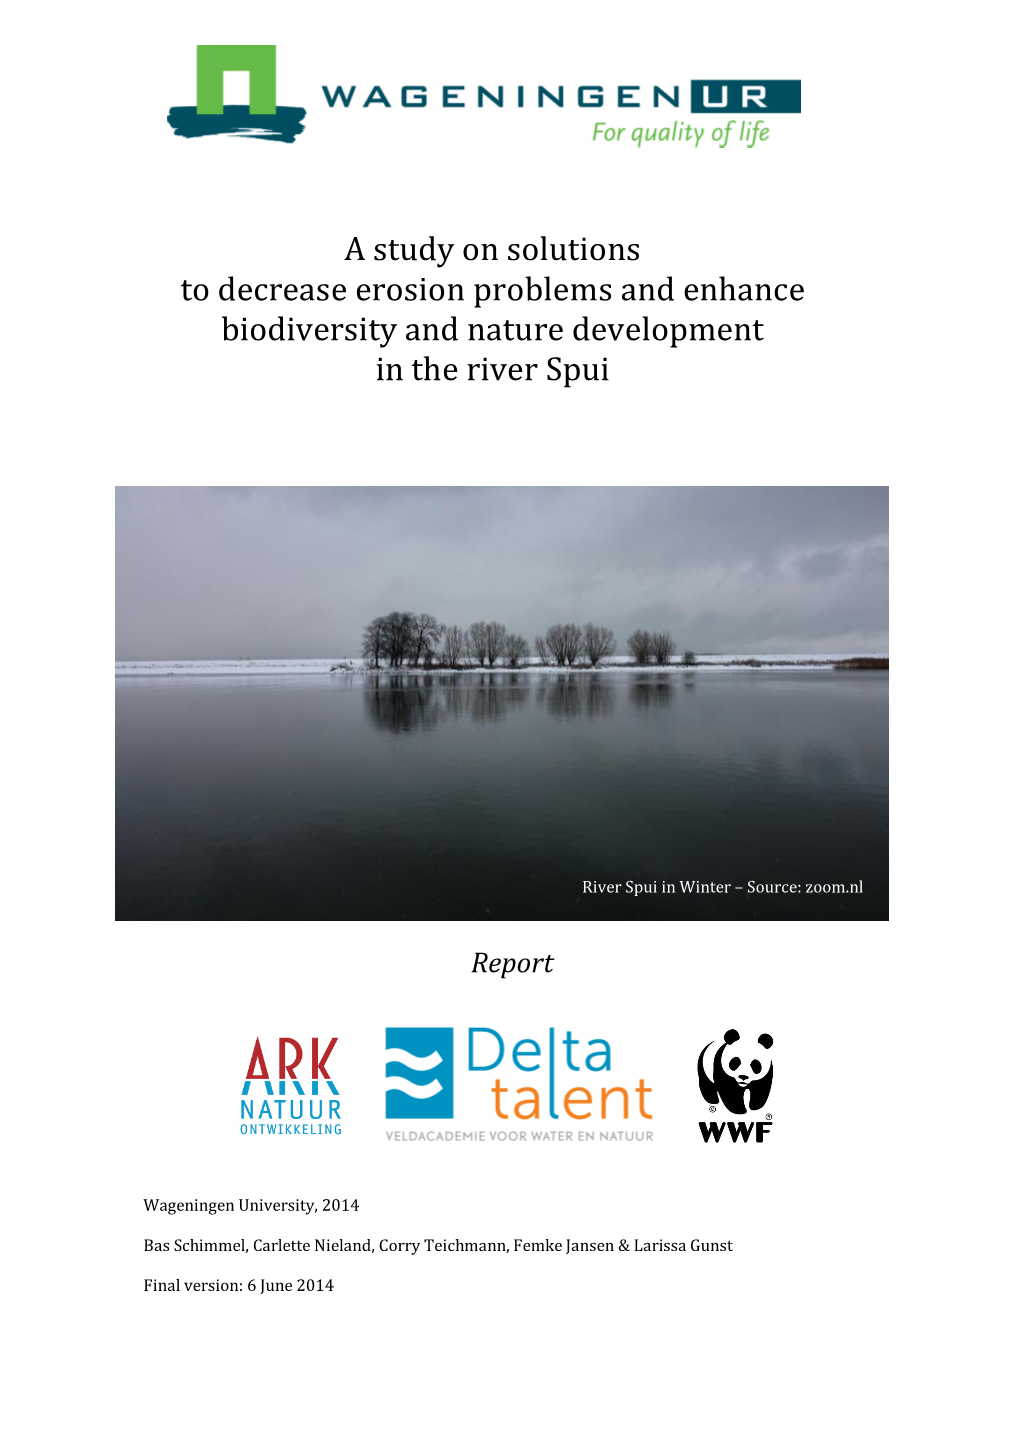 A Study on Solutions to Decrease Erosion Problems and Enhance Biodiversity and Nature Development in the River Spui